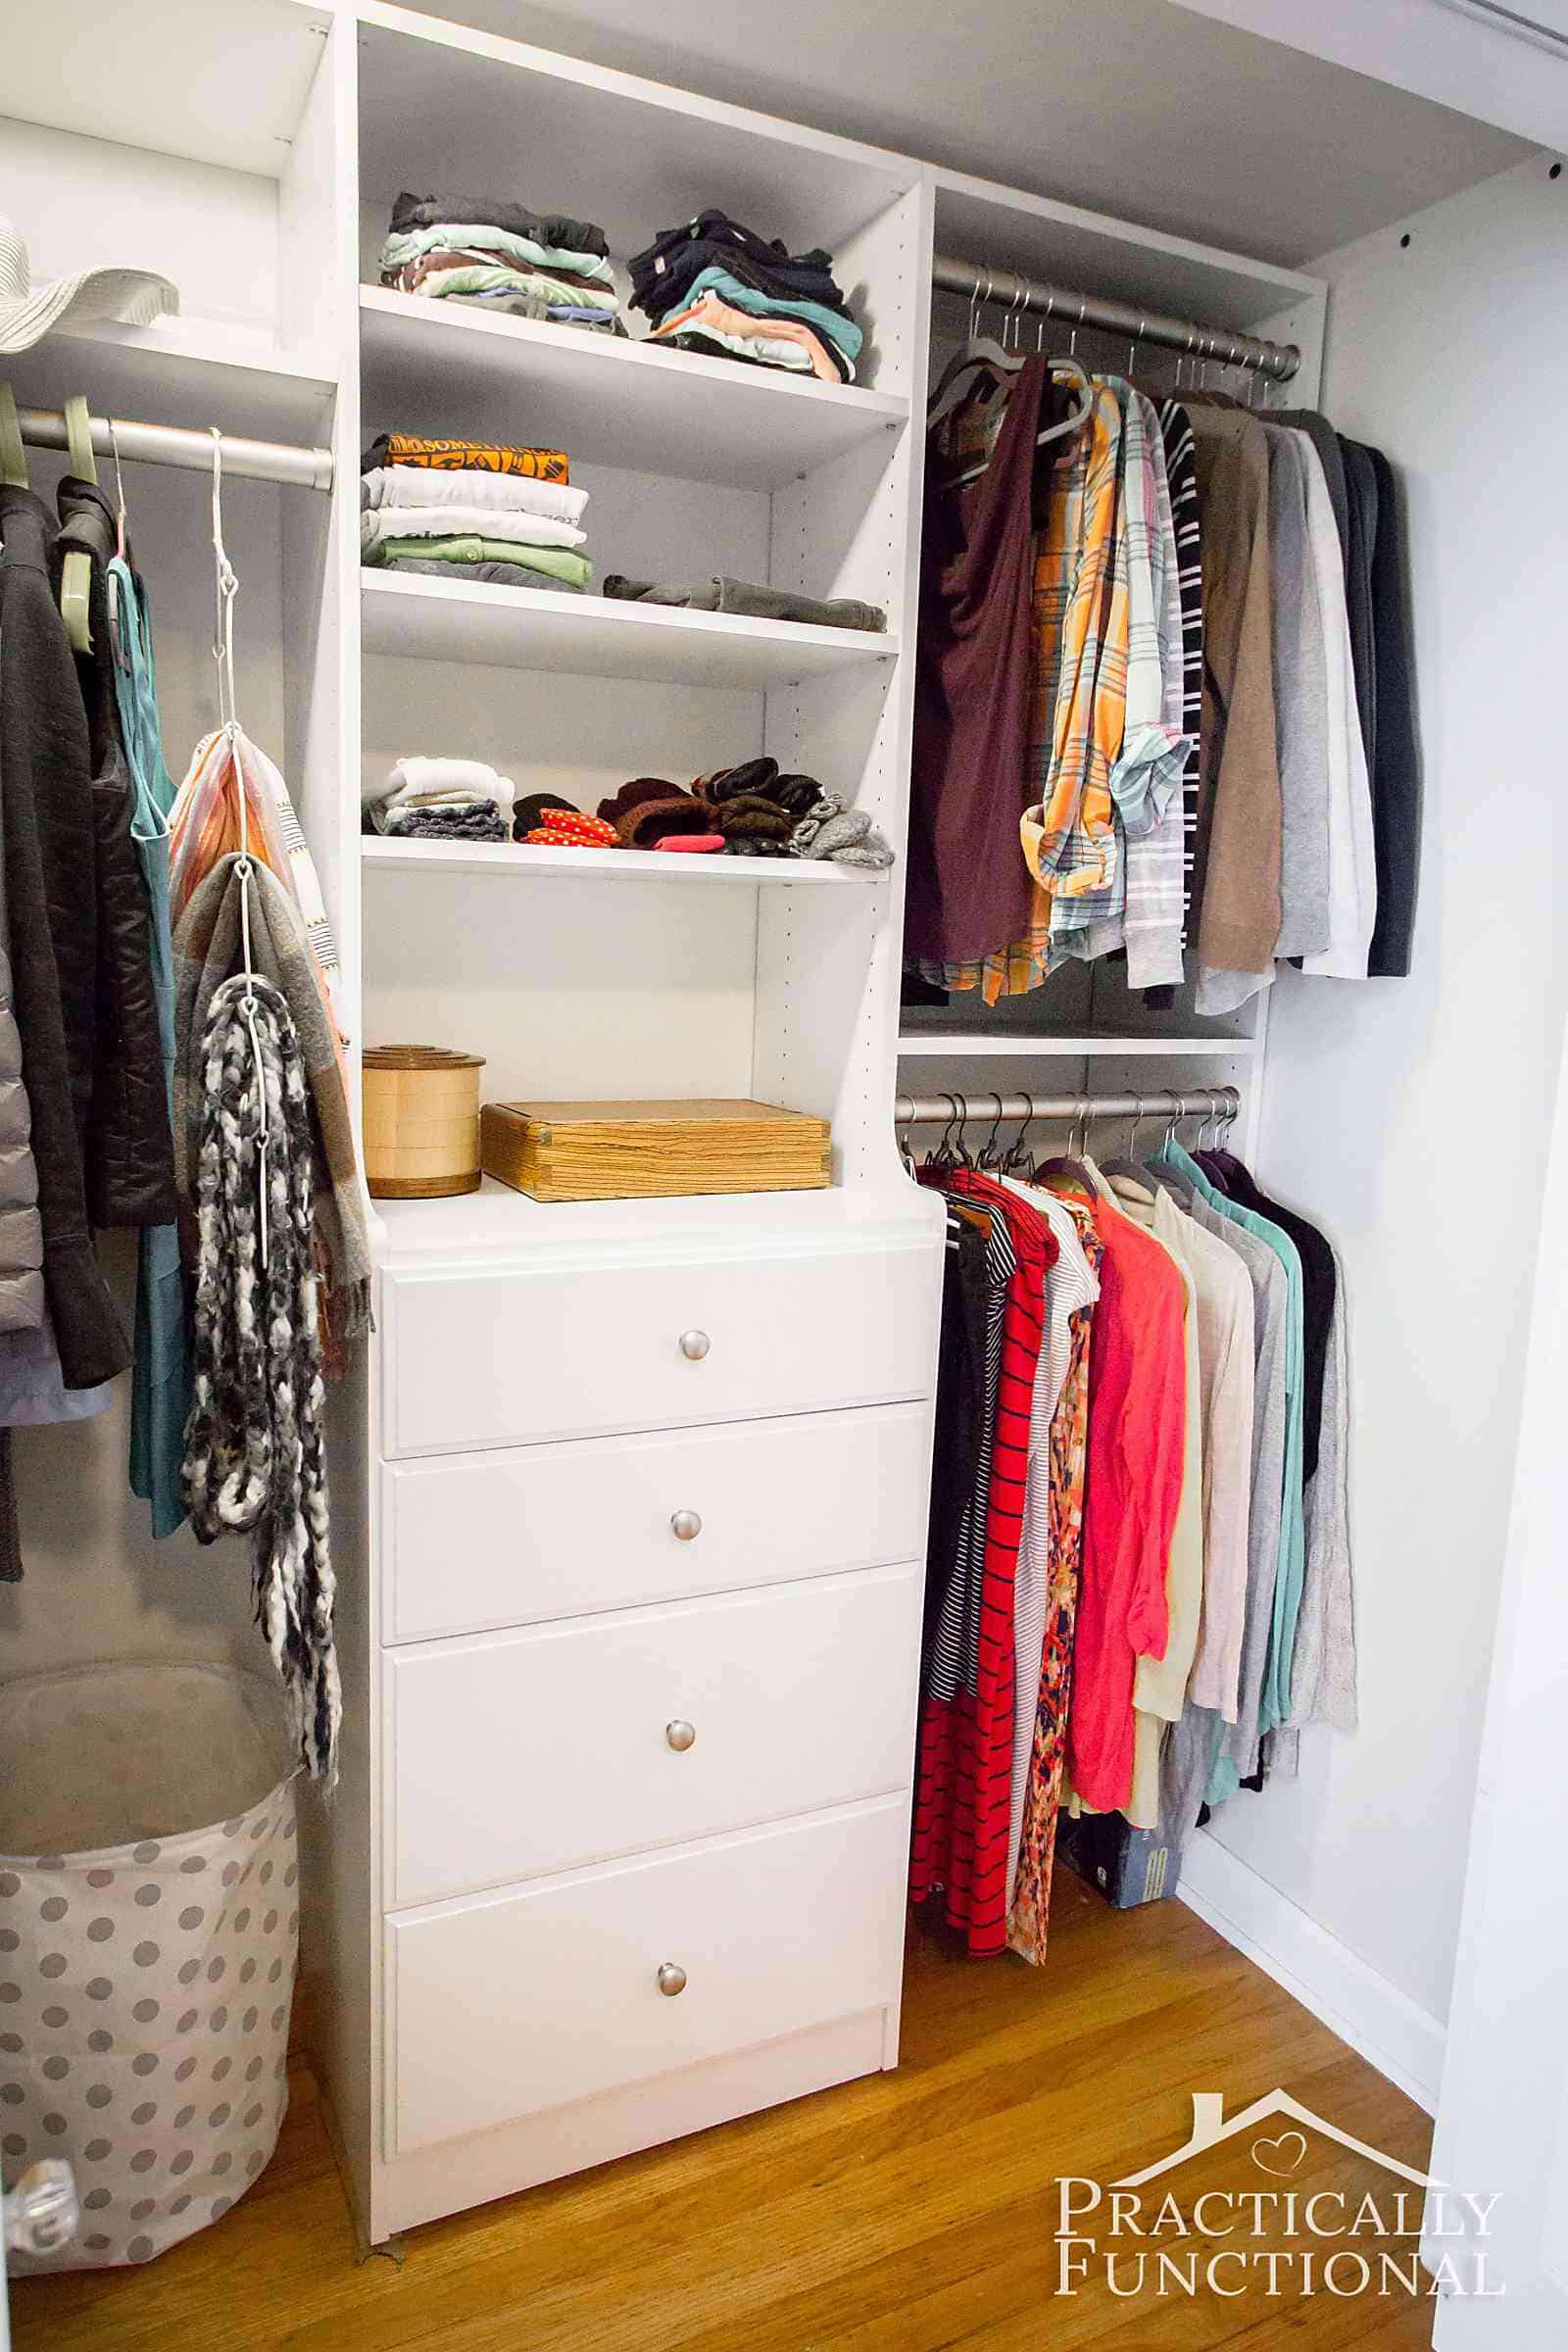 Small closet organization system with hanging clothes on the left and right and a chest of drawers with shelves above in the center.